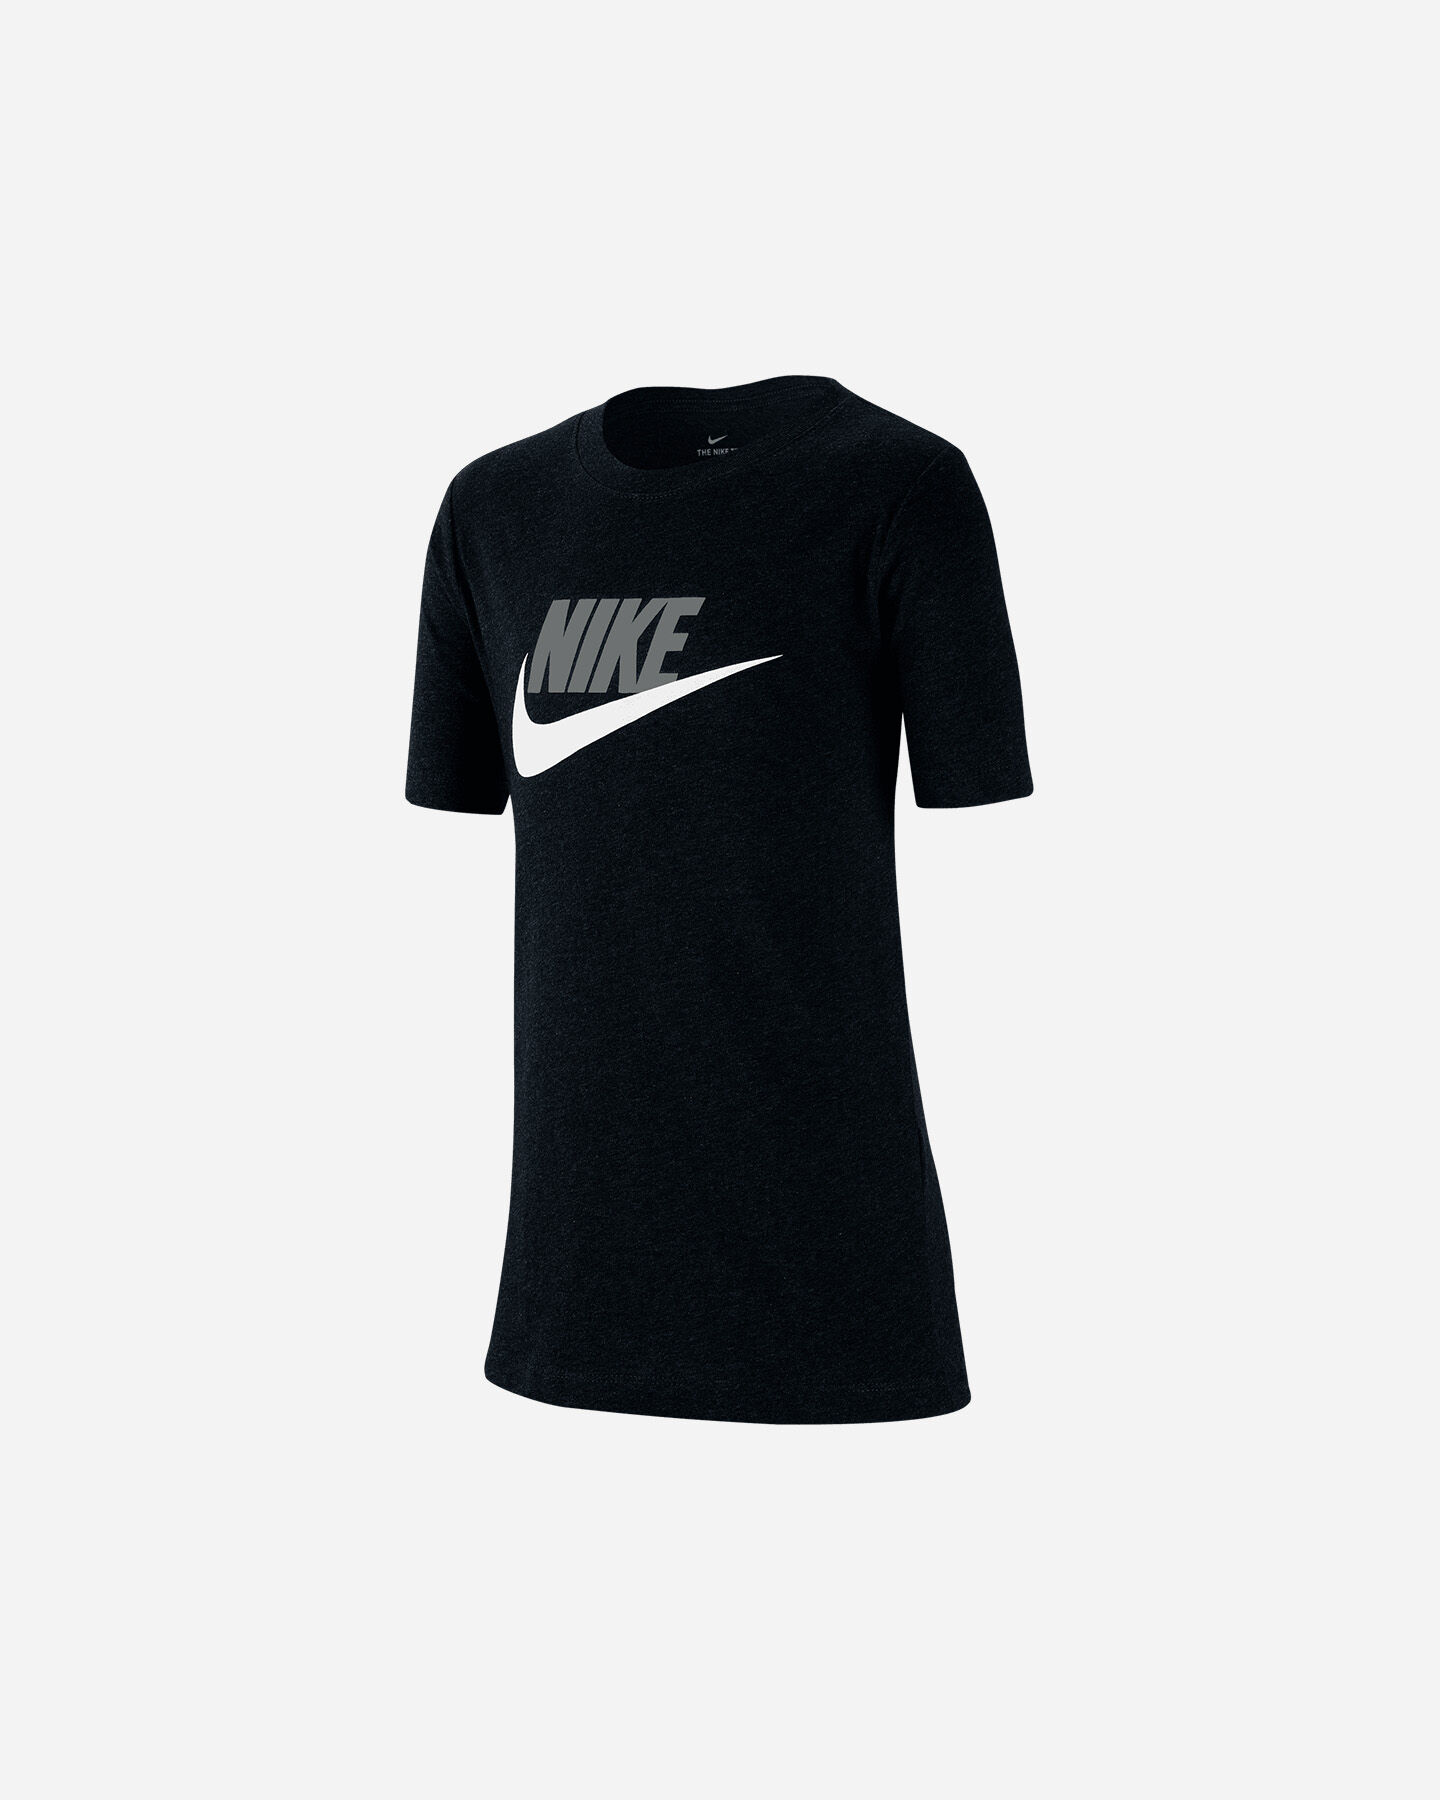  T-Shirt NIKE CLOS ANGELESSSIC JR S5162700|013|S scatto 0